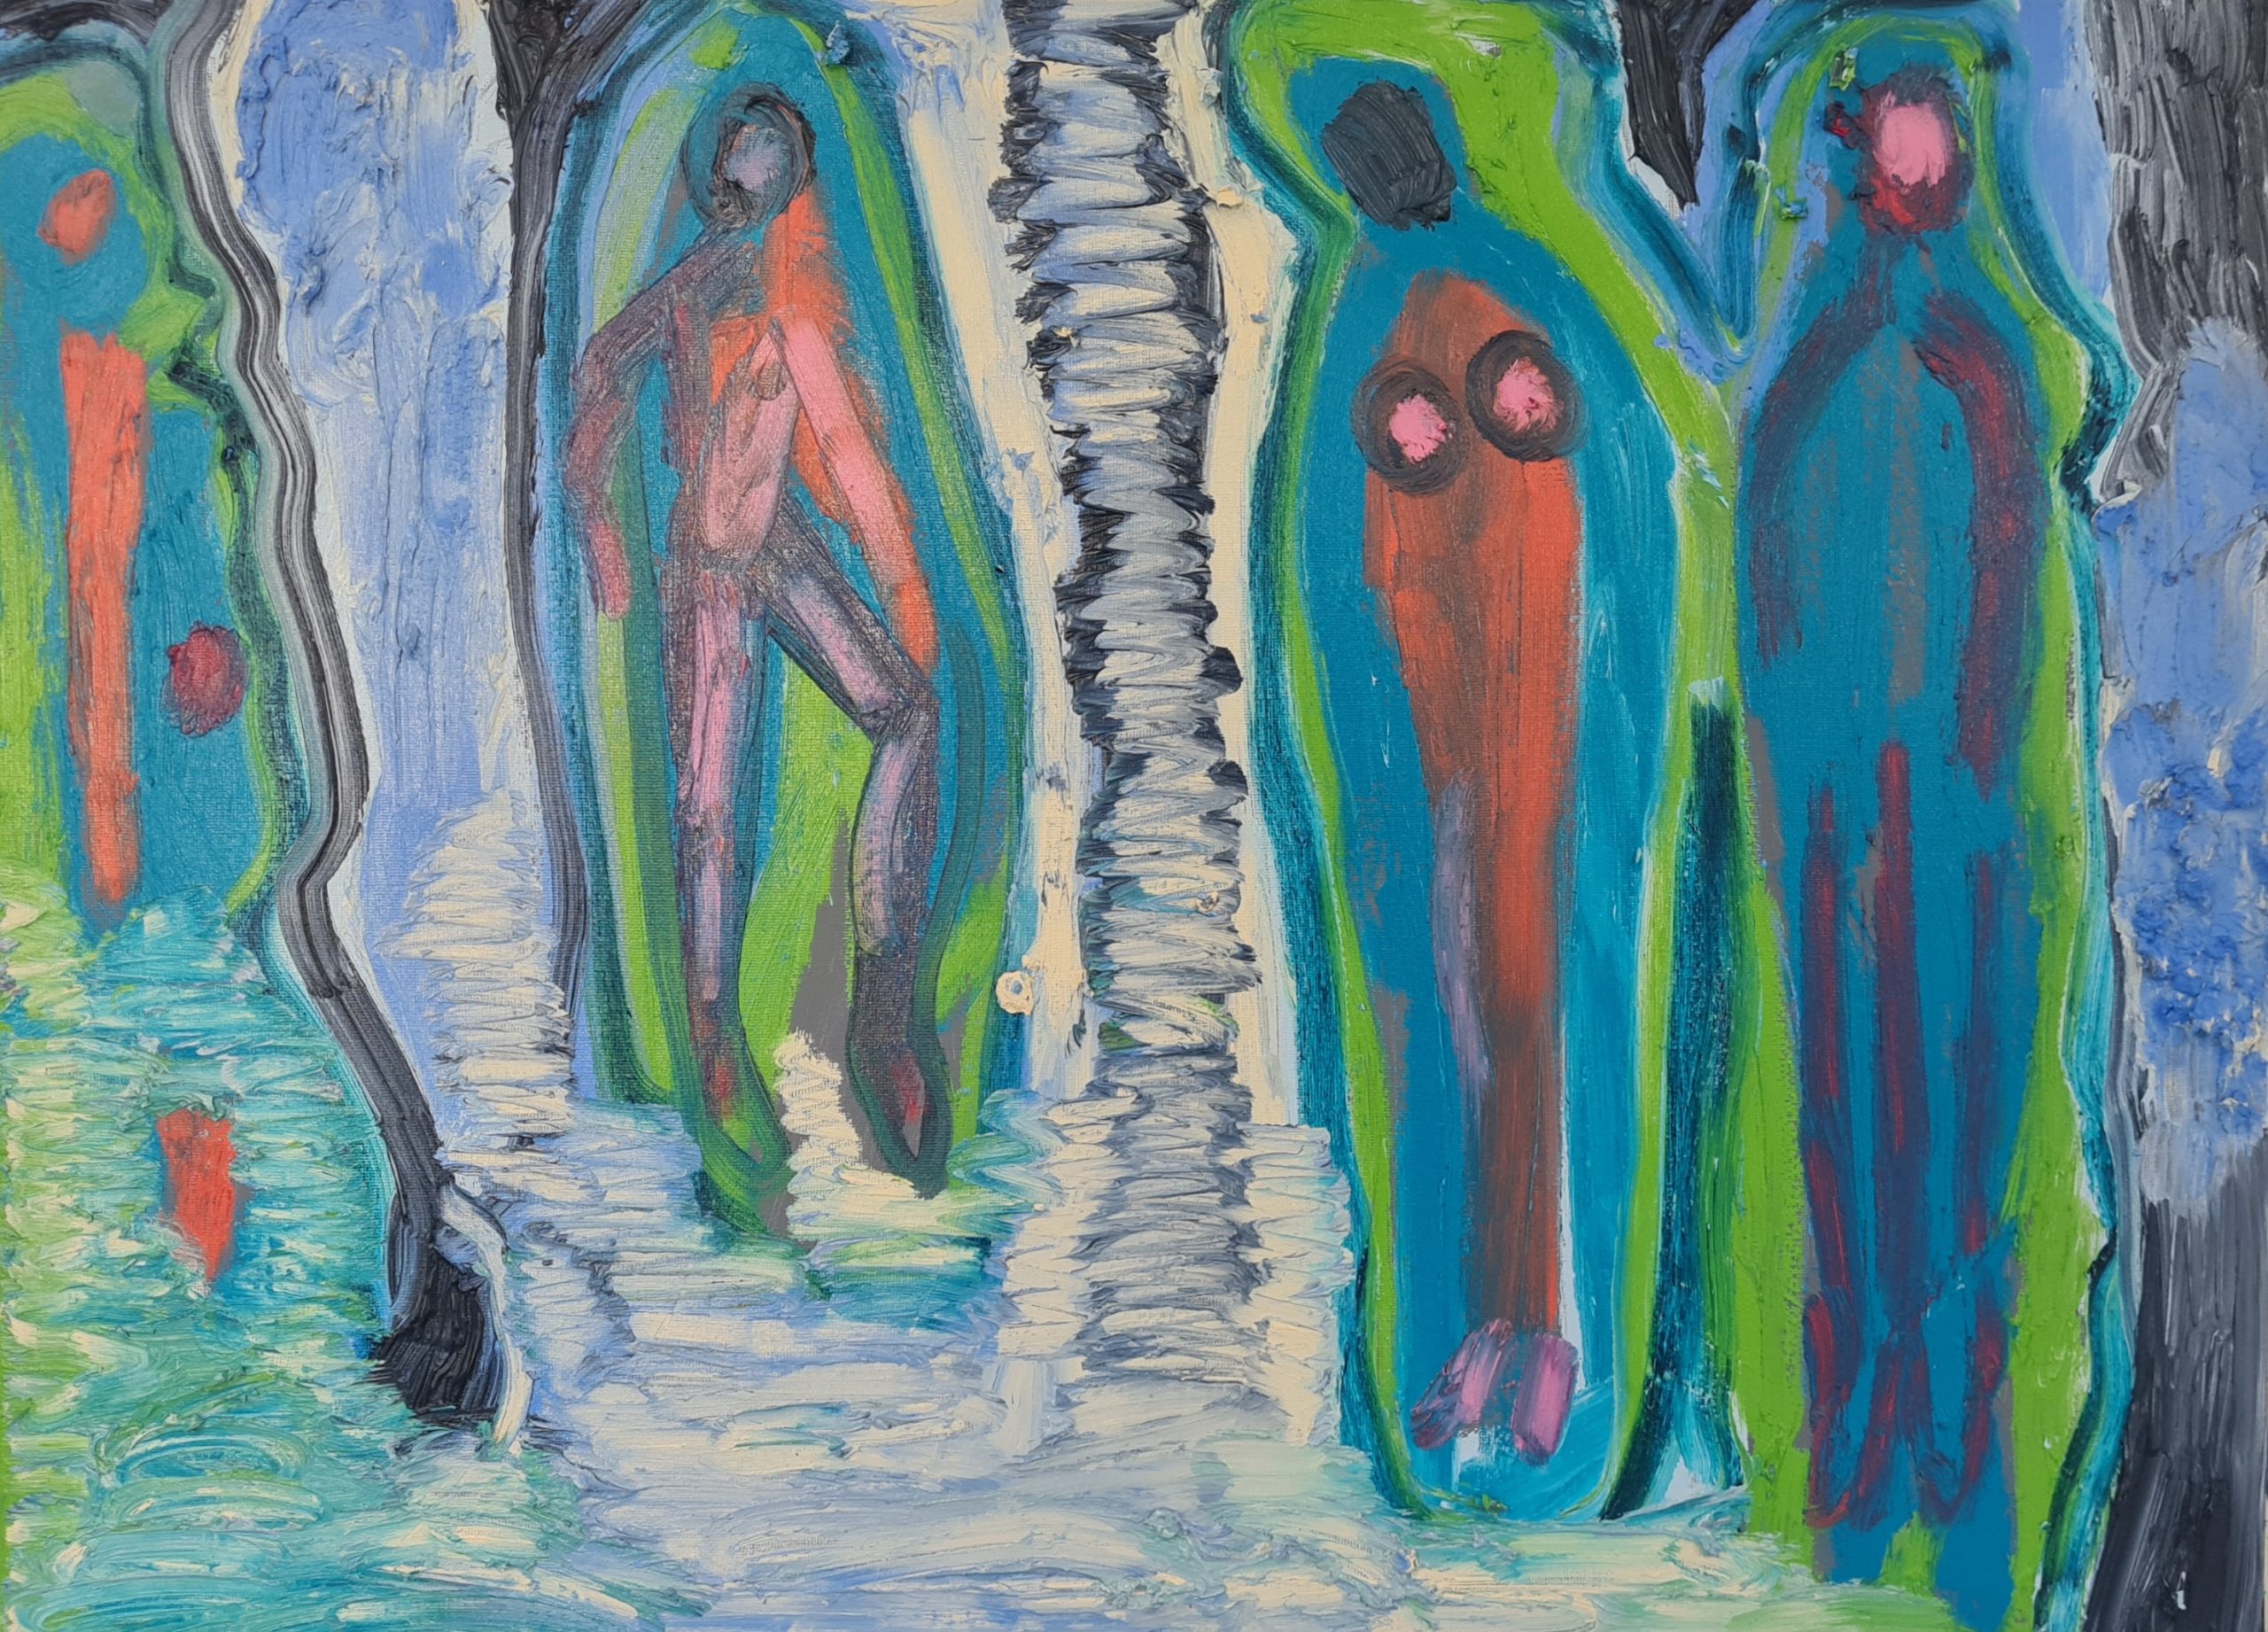 Sketches of figures in blue and red from oil sticks inspired by Garden of Eden - fertile imagery